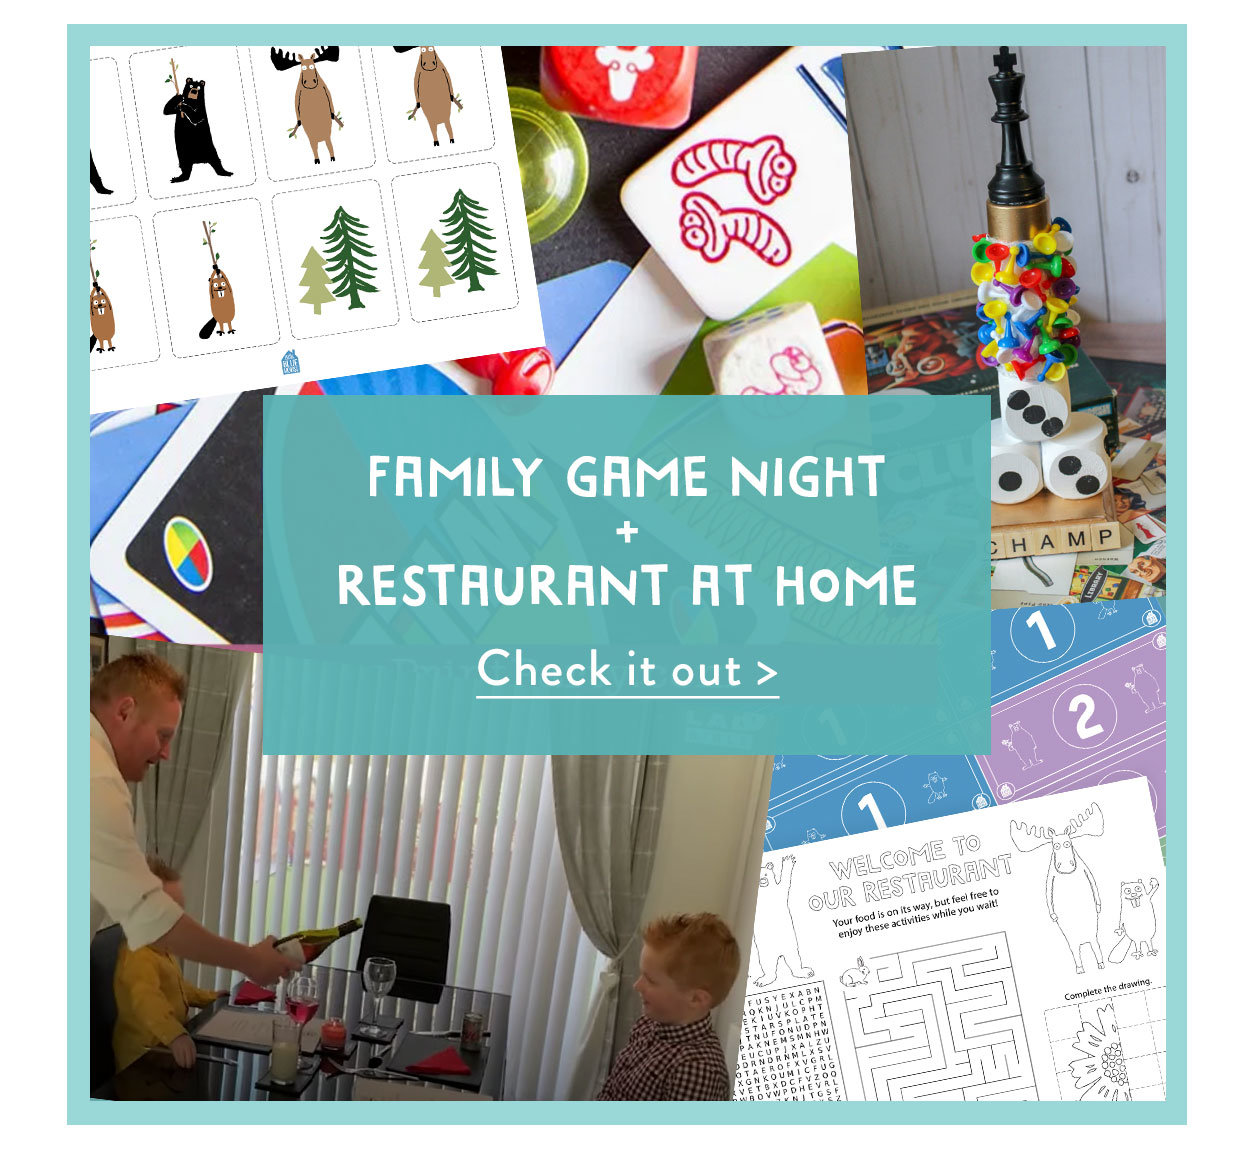 Family game night + Restaurant at home